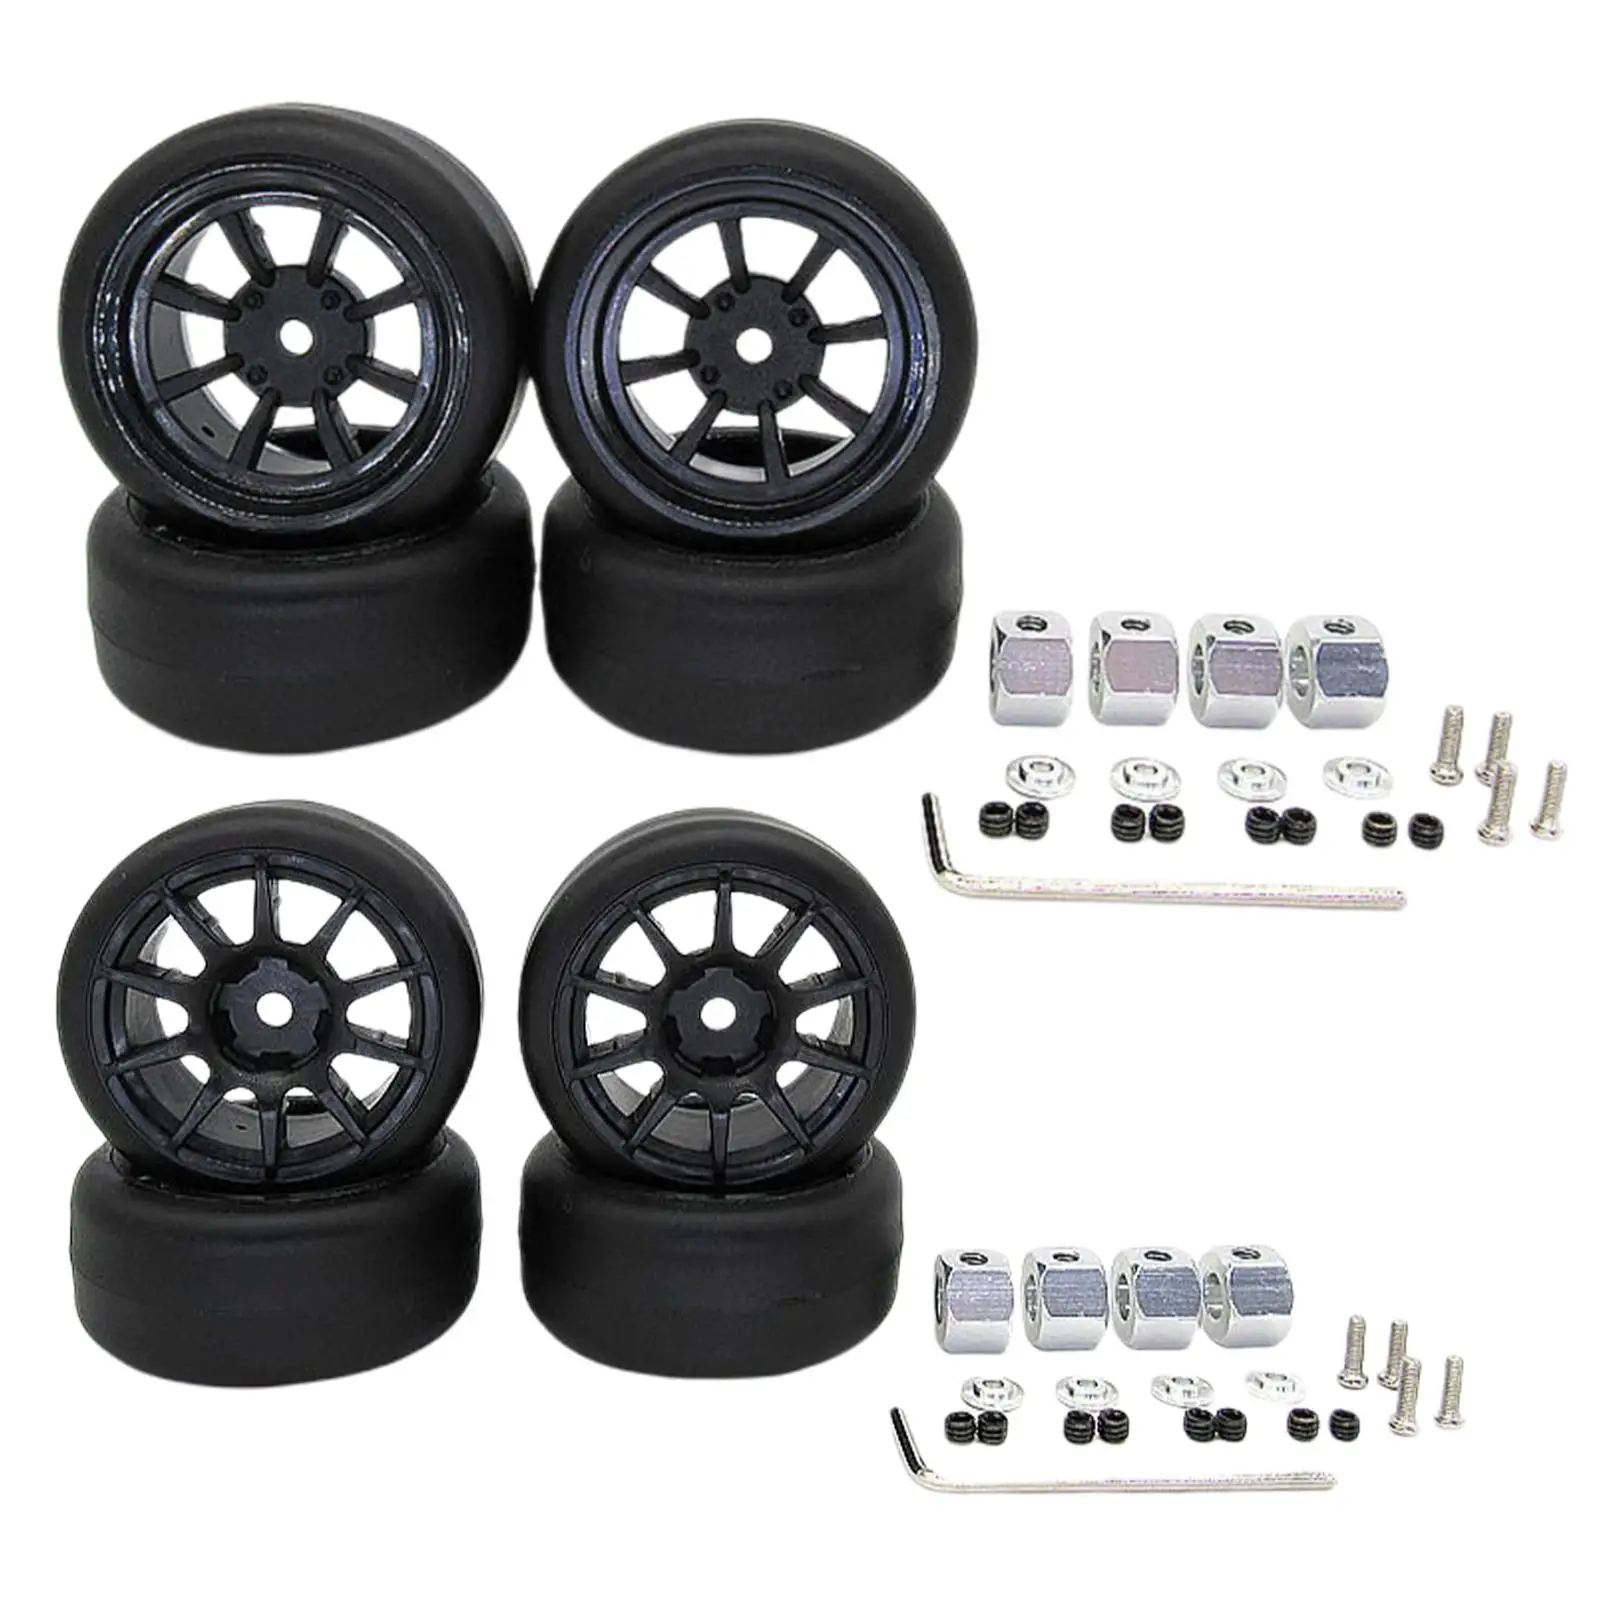 4Pcs RC Car Tires with Adapter for WPL D12 1/10 RC Car 1:10 RC Truck Replacement Parts